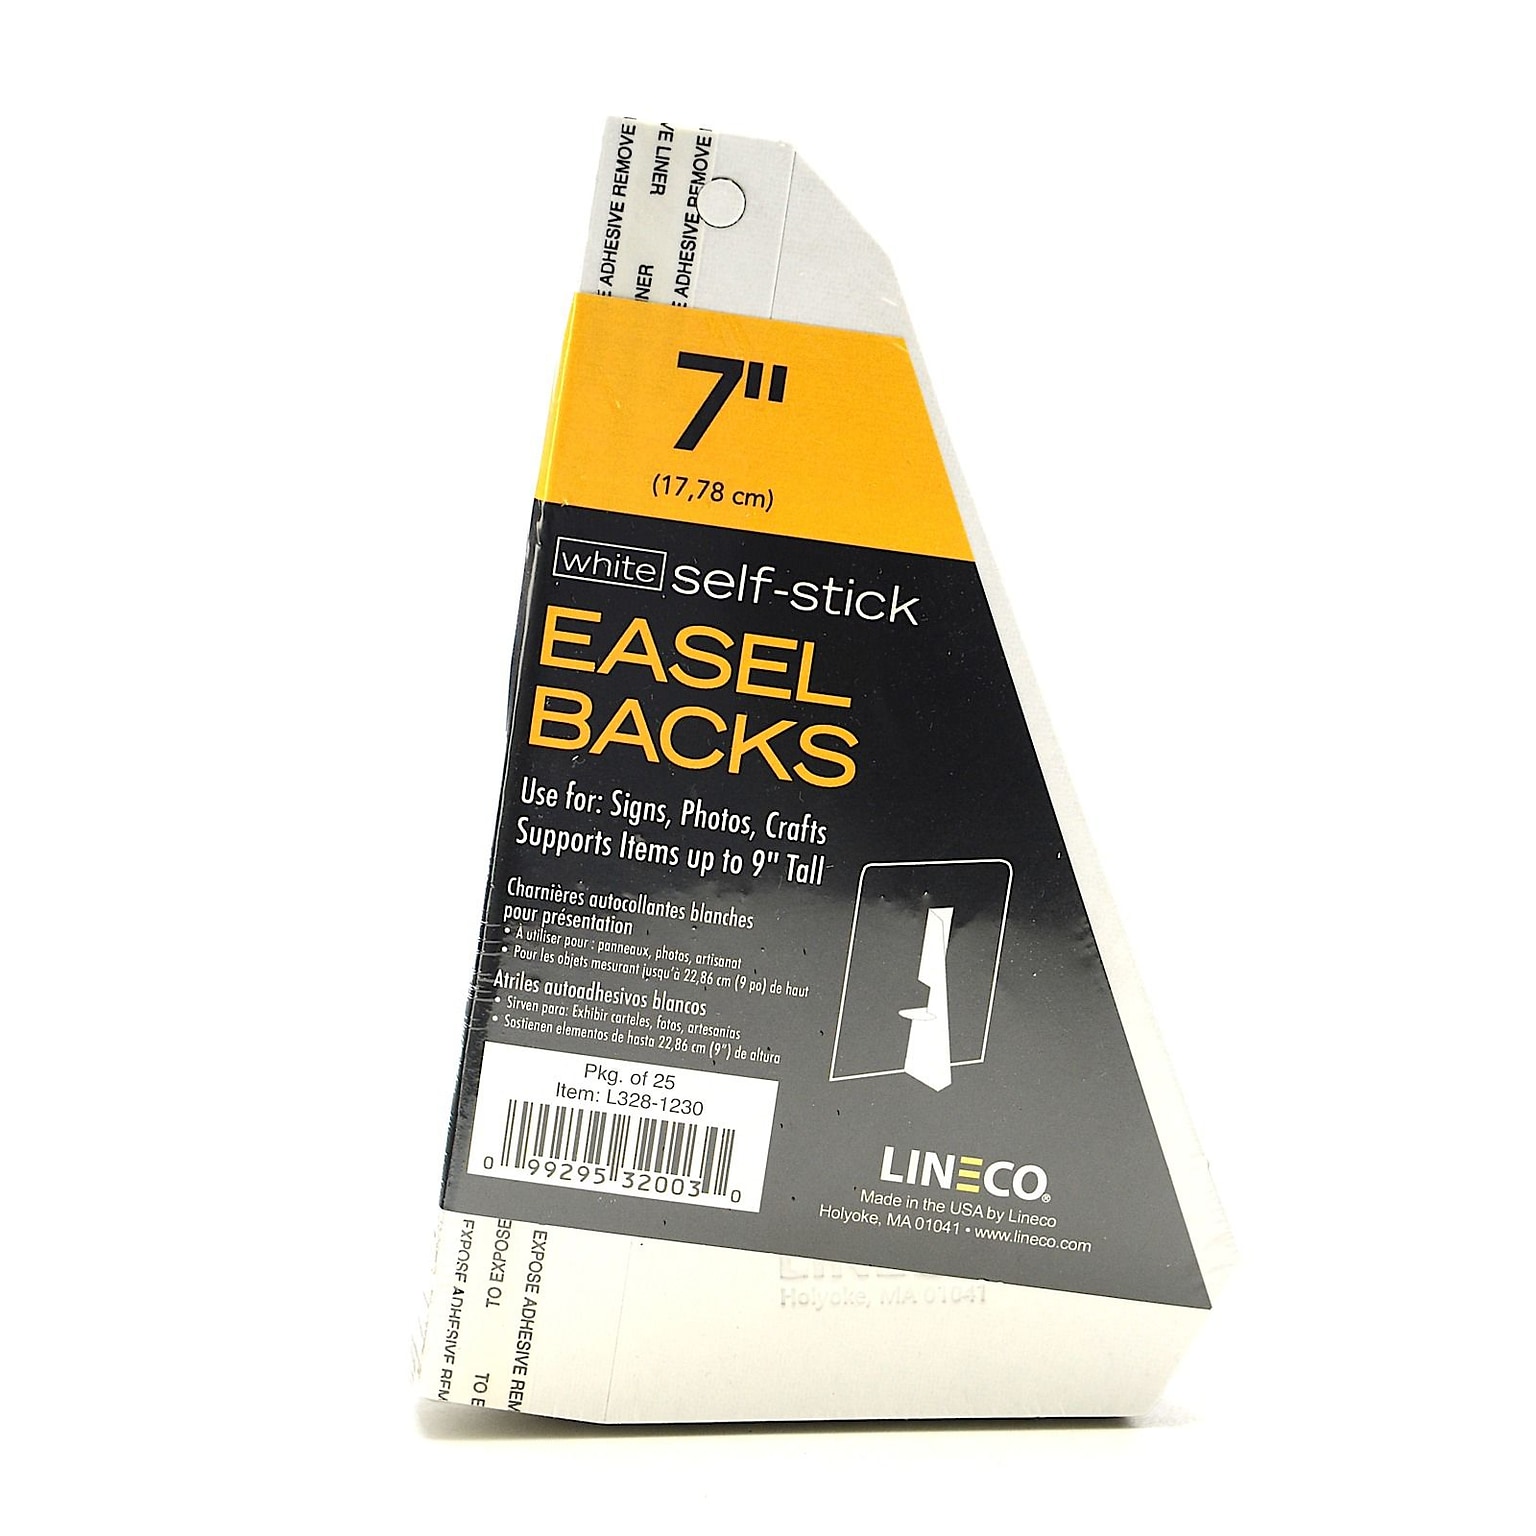 Lineco Self Stick Easel Backs White 7 In. Pack Of 25 [Pack Of 2] (2PK-L328-1230)